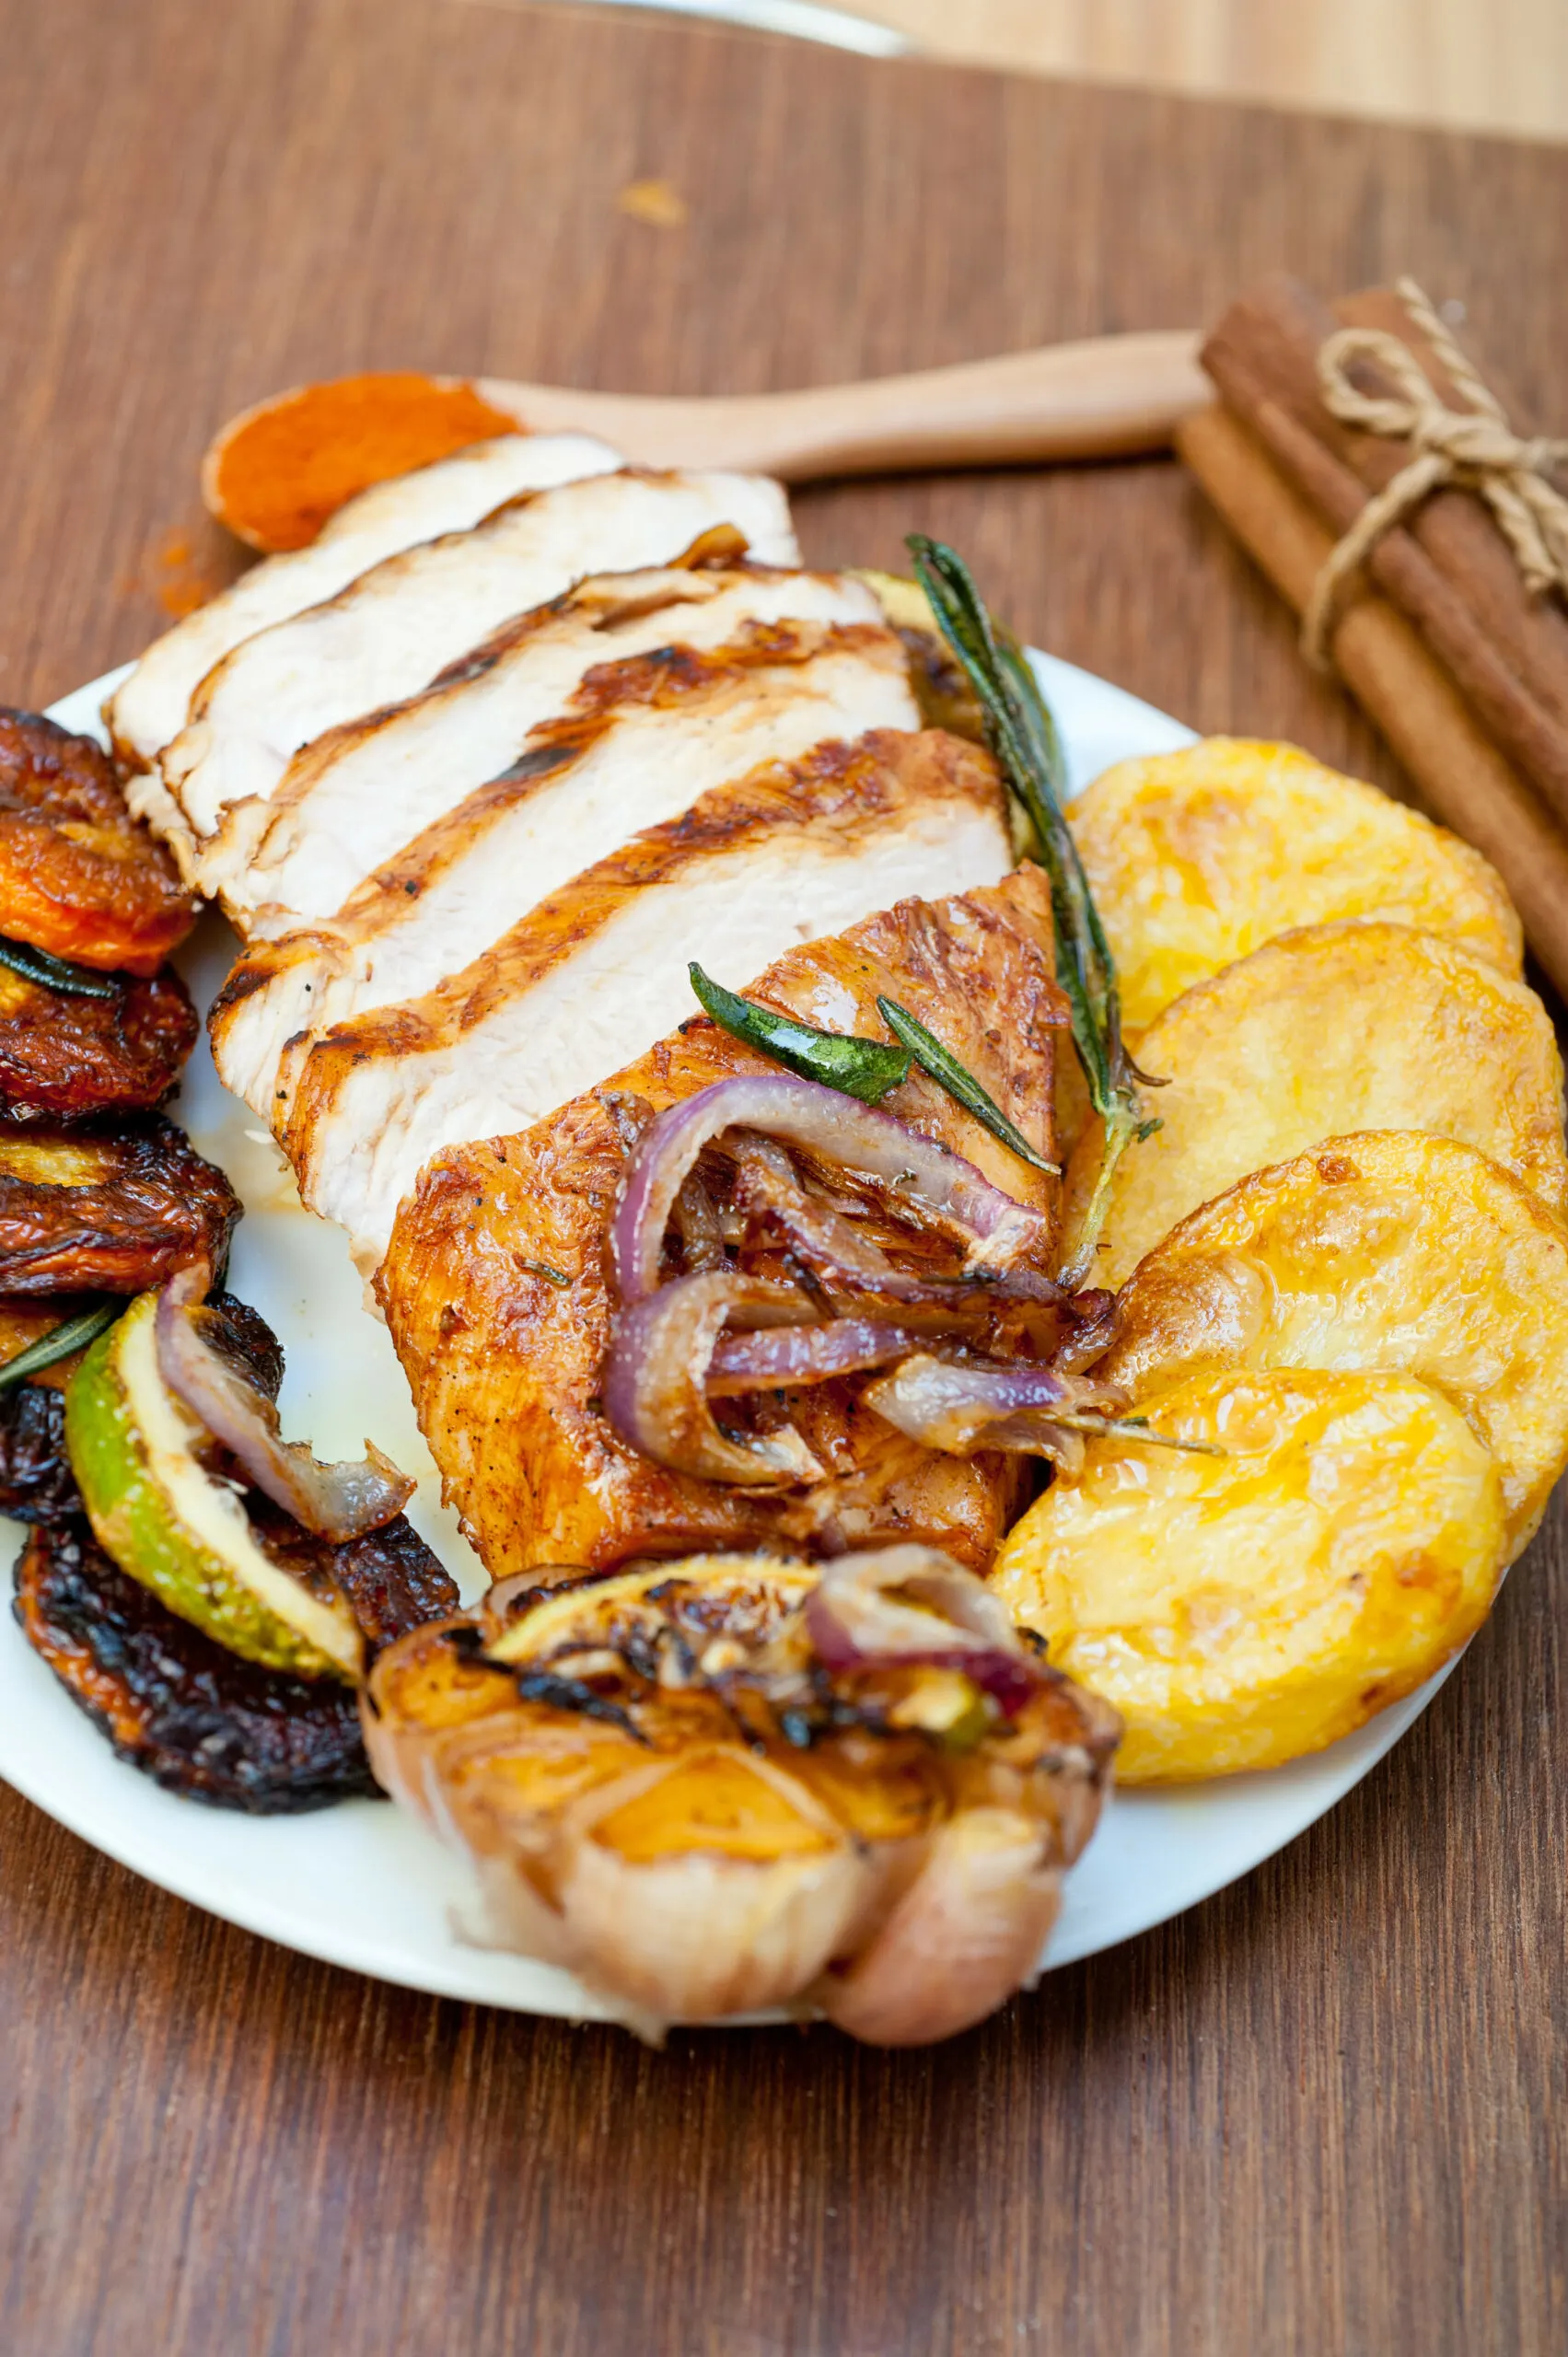 Roasted Grilled Bbq Chicken Breast With Herbs And Spices